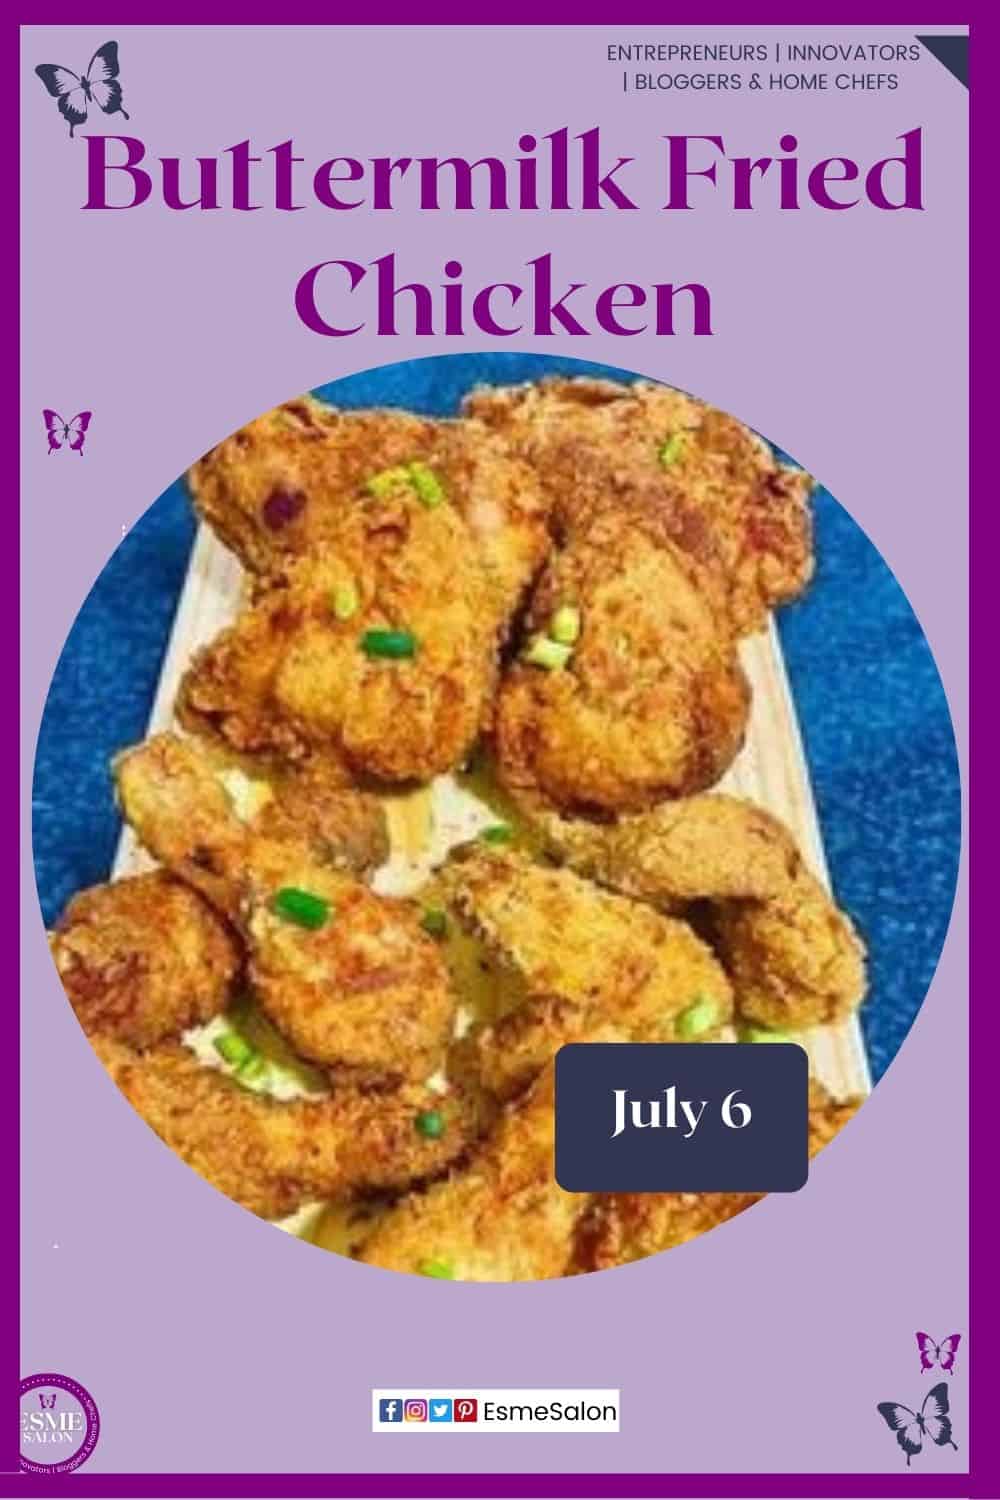 an image of chicken pieces dunked in buttermilk and fried until crispy